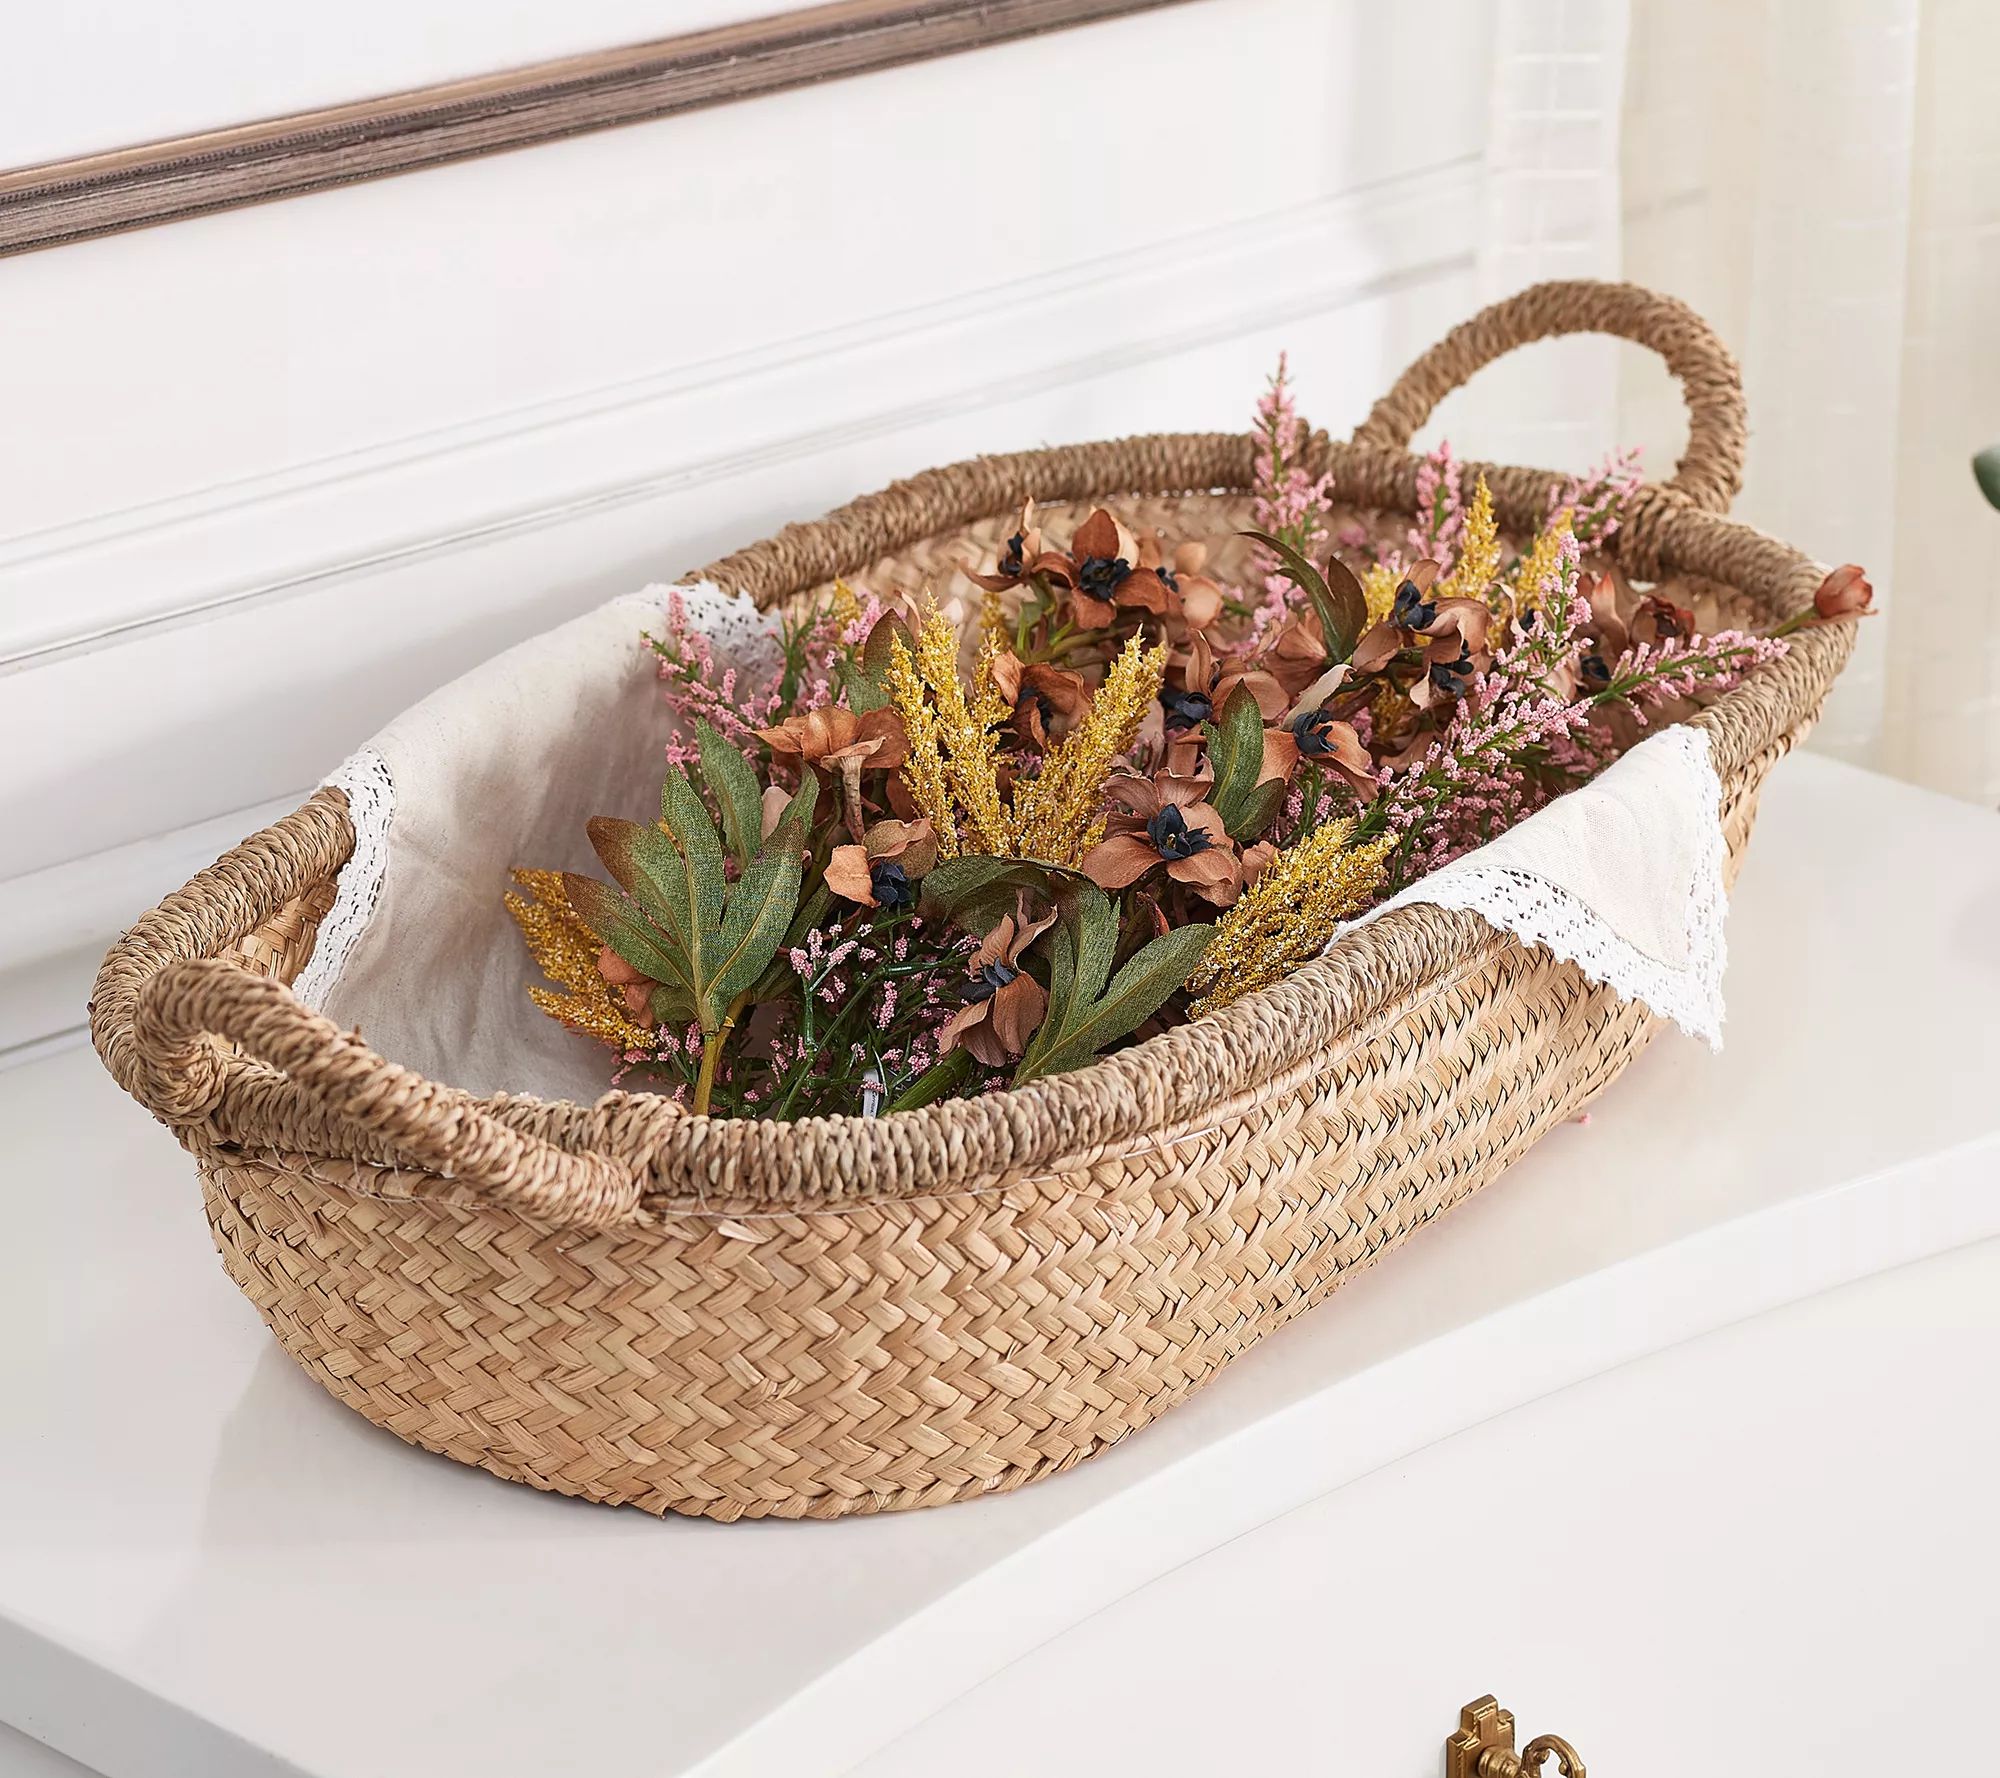 27" Woven Seagrass Tray by Liz Marie Seagrass Tray - QVC.com | QVC